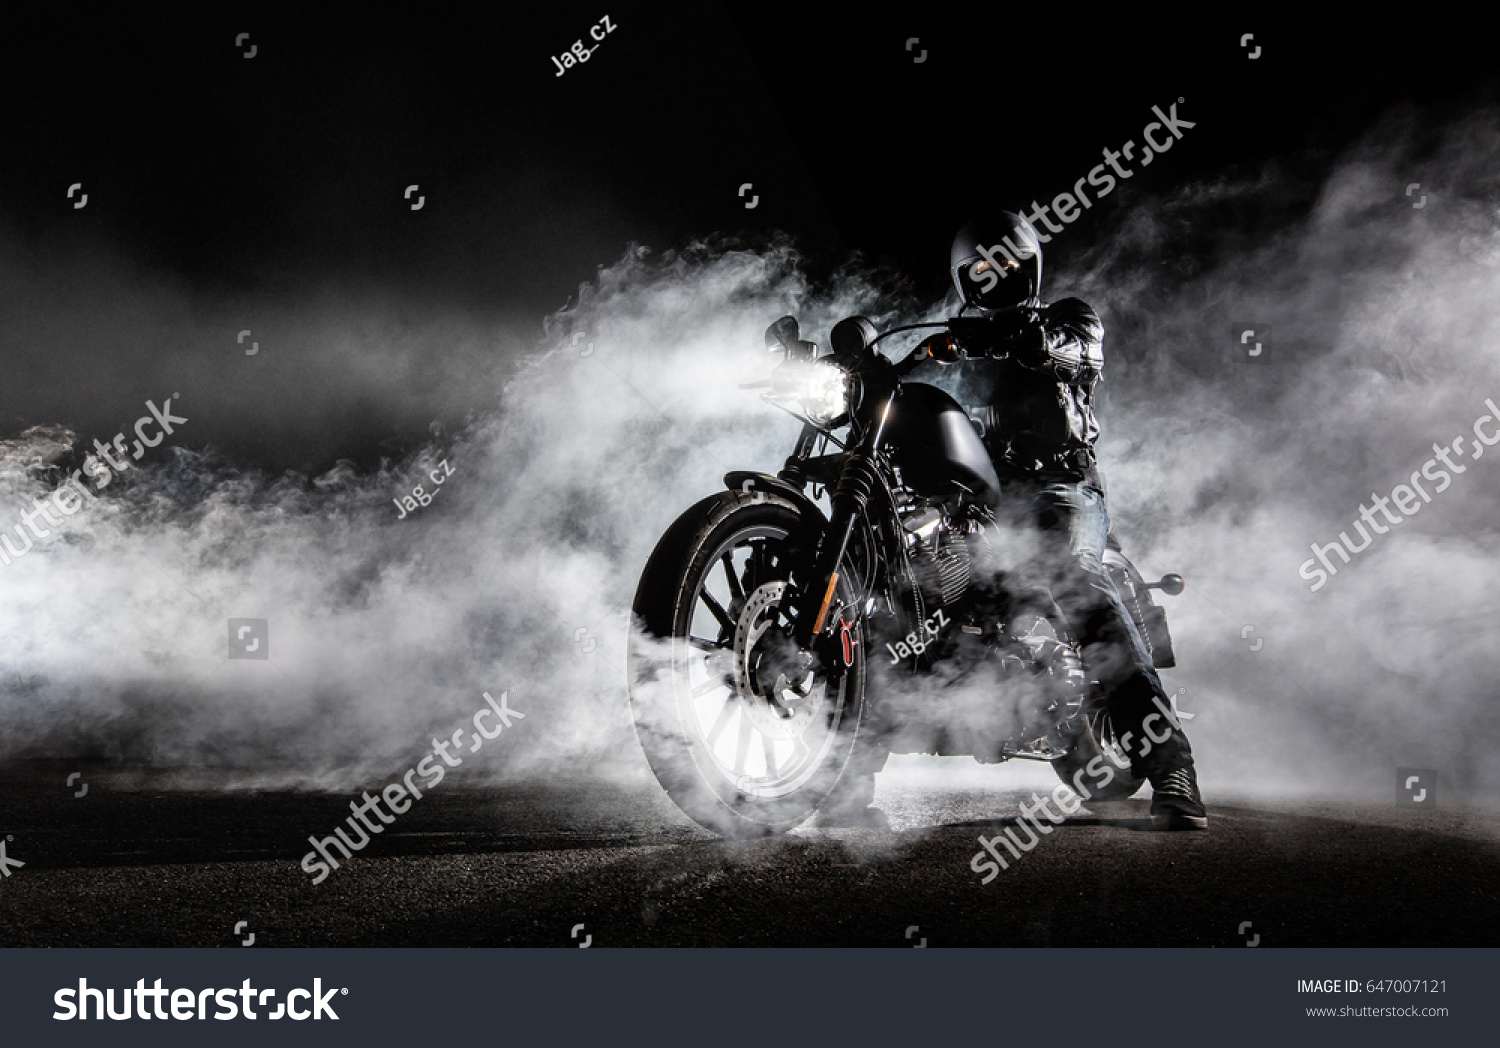 High power motorcycle chopper with man rider at night. Fog with backlights on background. #647007121